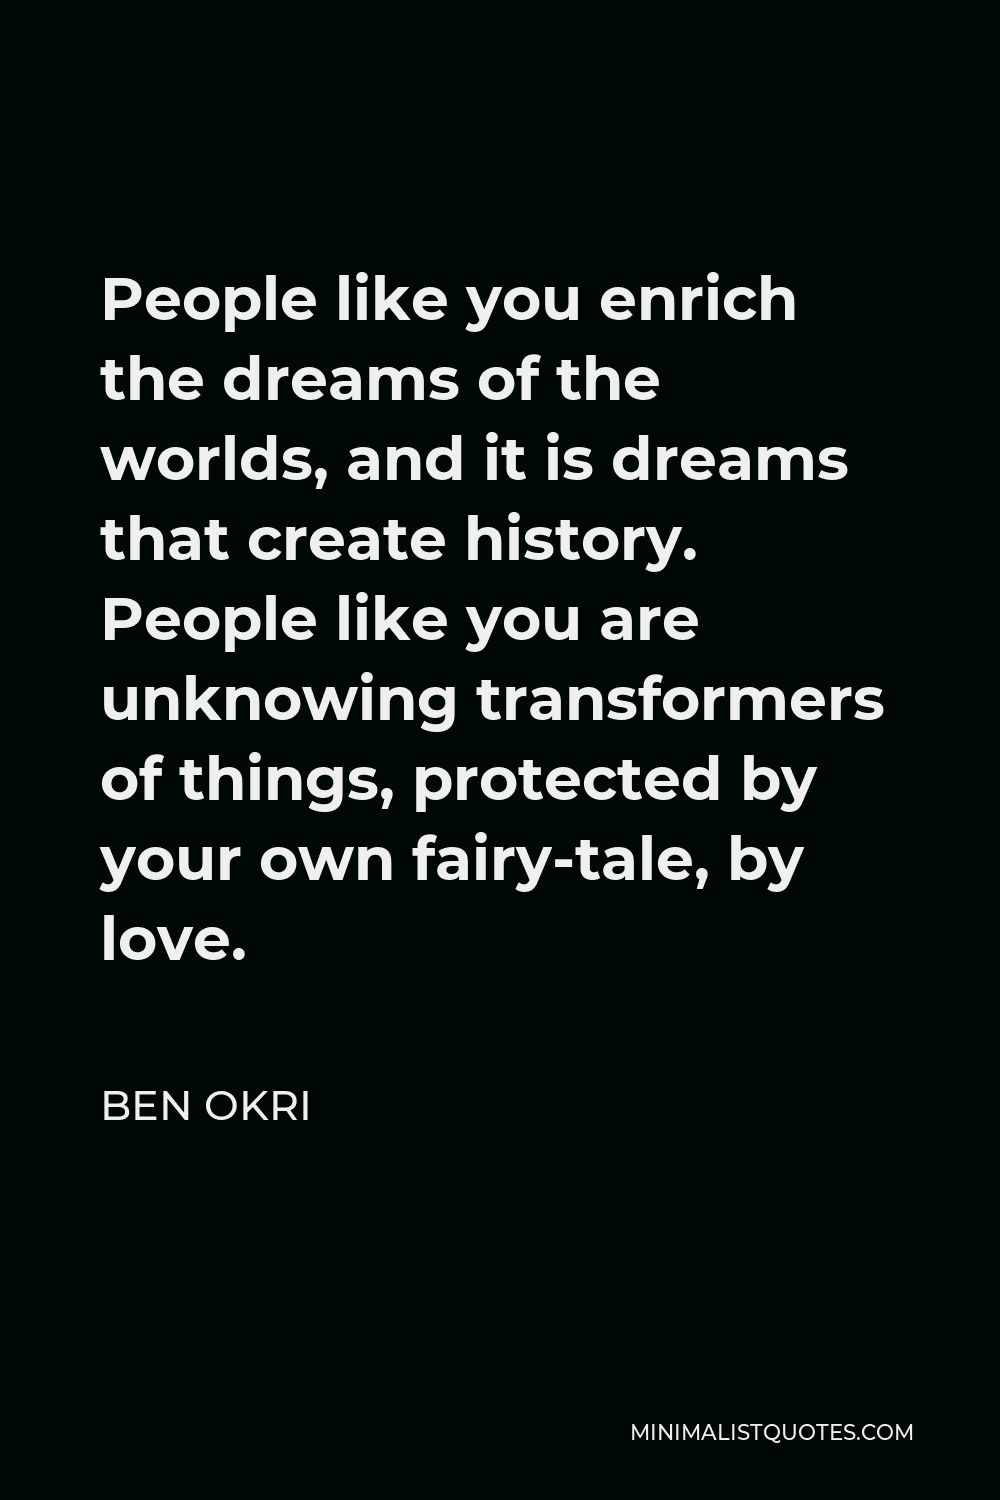 Ben Okri Quote - People like you enrich the dreams of the worlds, and it is dreams that create history. People like you are unknowing transformers of things, protected by your own fairy-tale, by love.